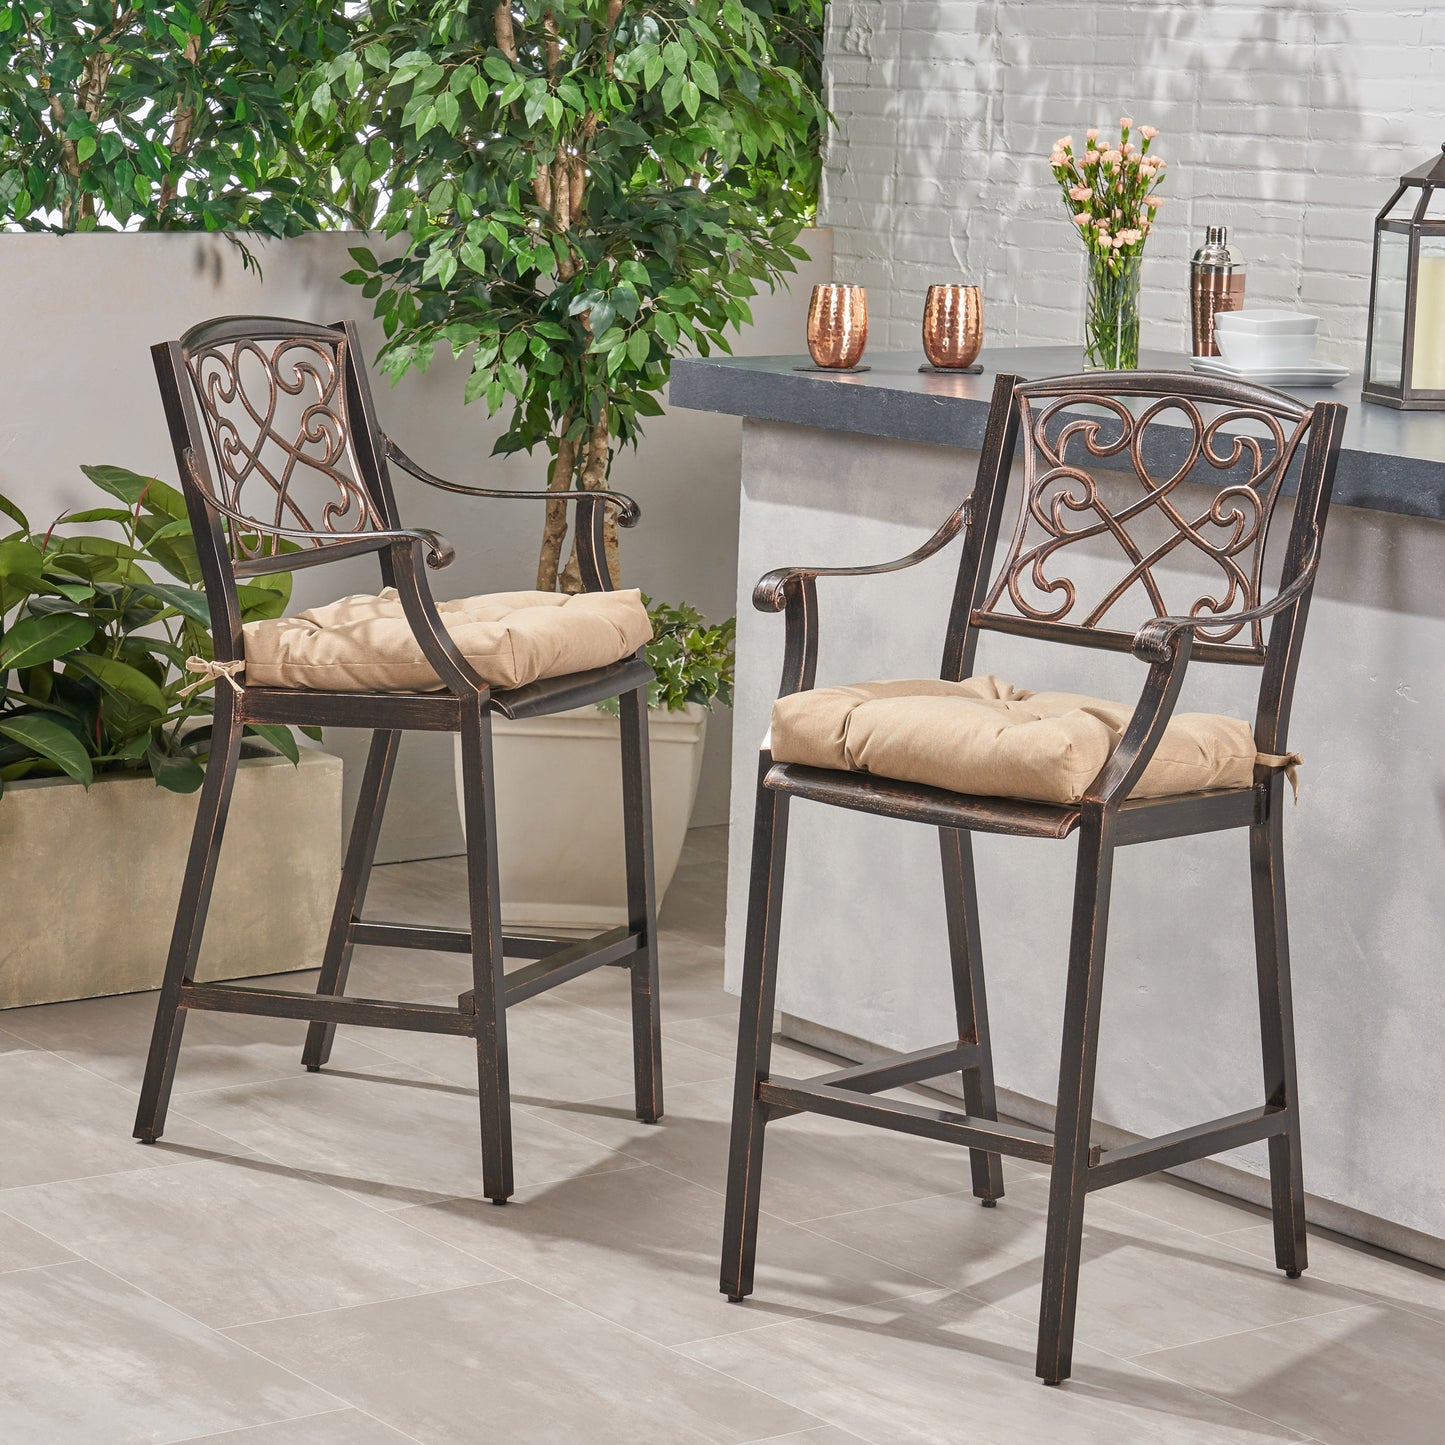 Sherry Outdoor Barstool with Cushion (Set of 2)